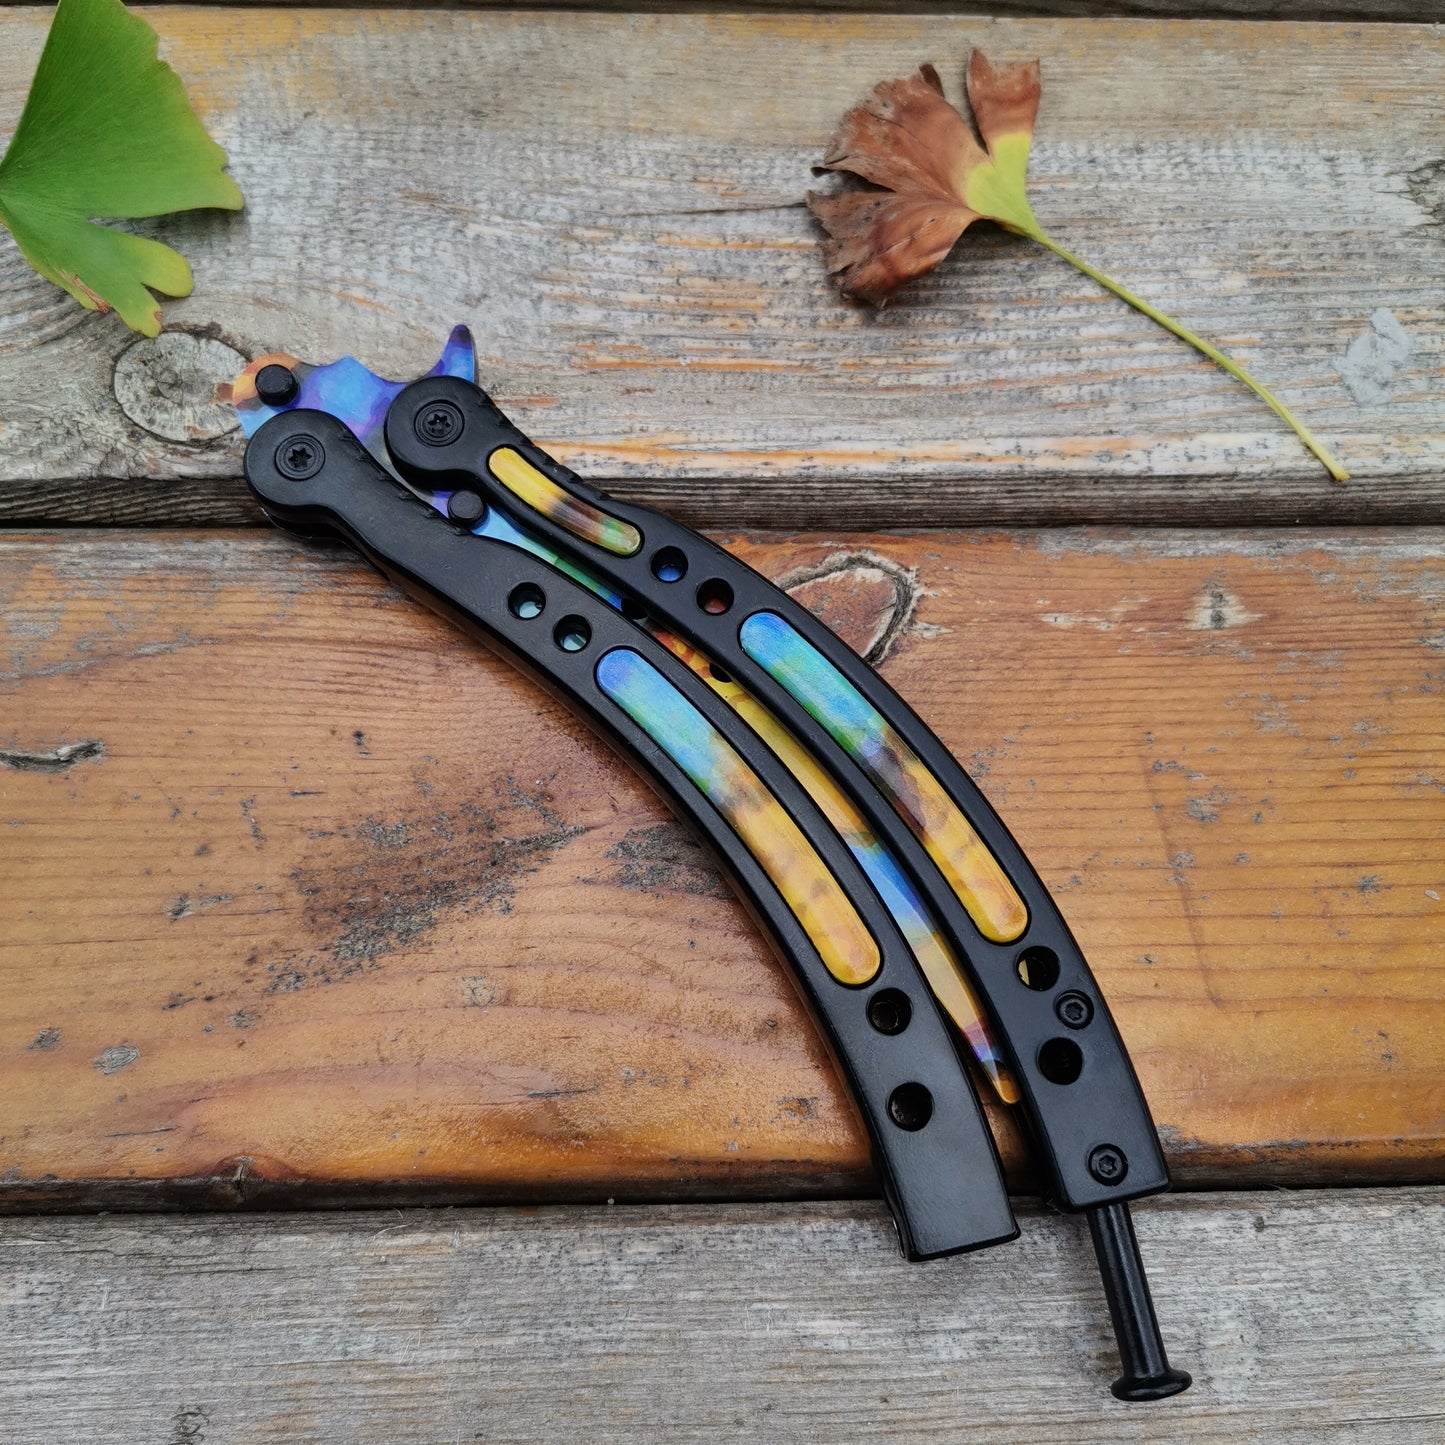 Global Offensive Game Butterfly Knife Trainer Replica